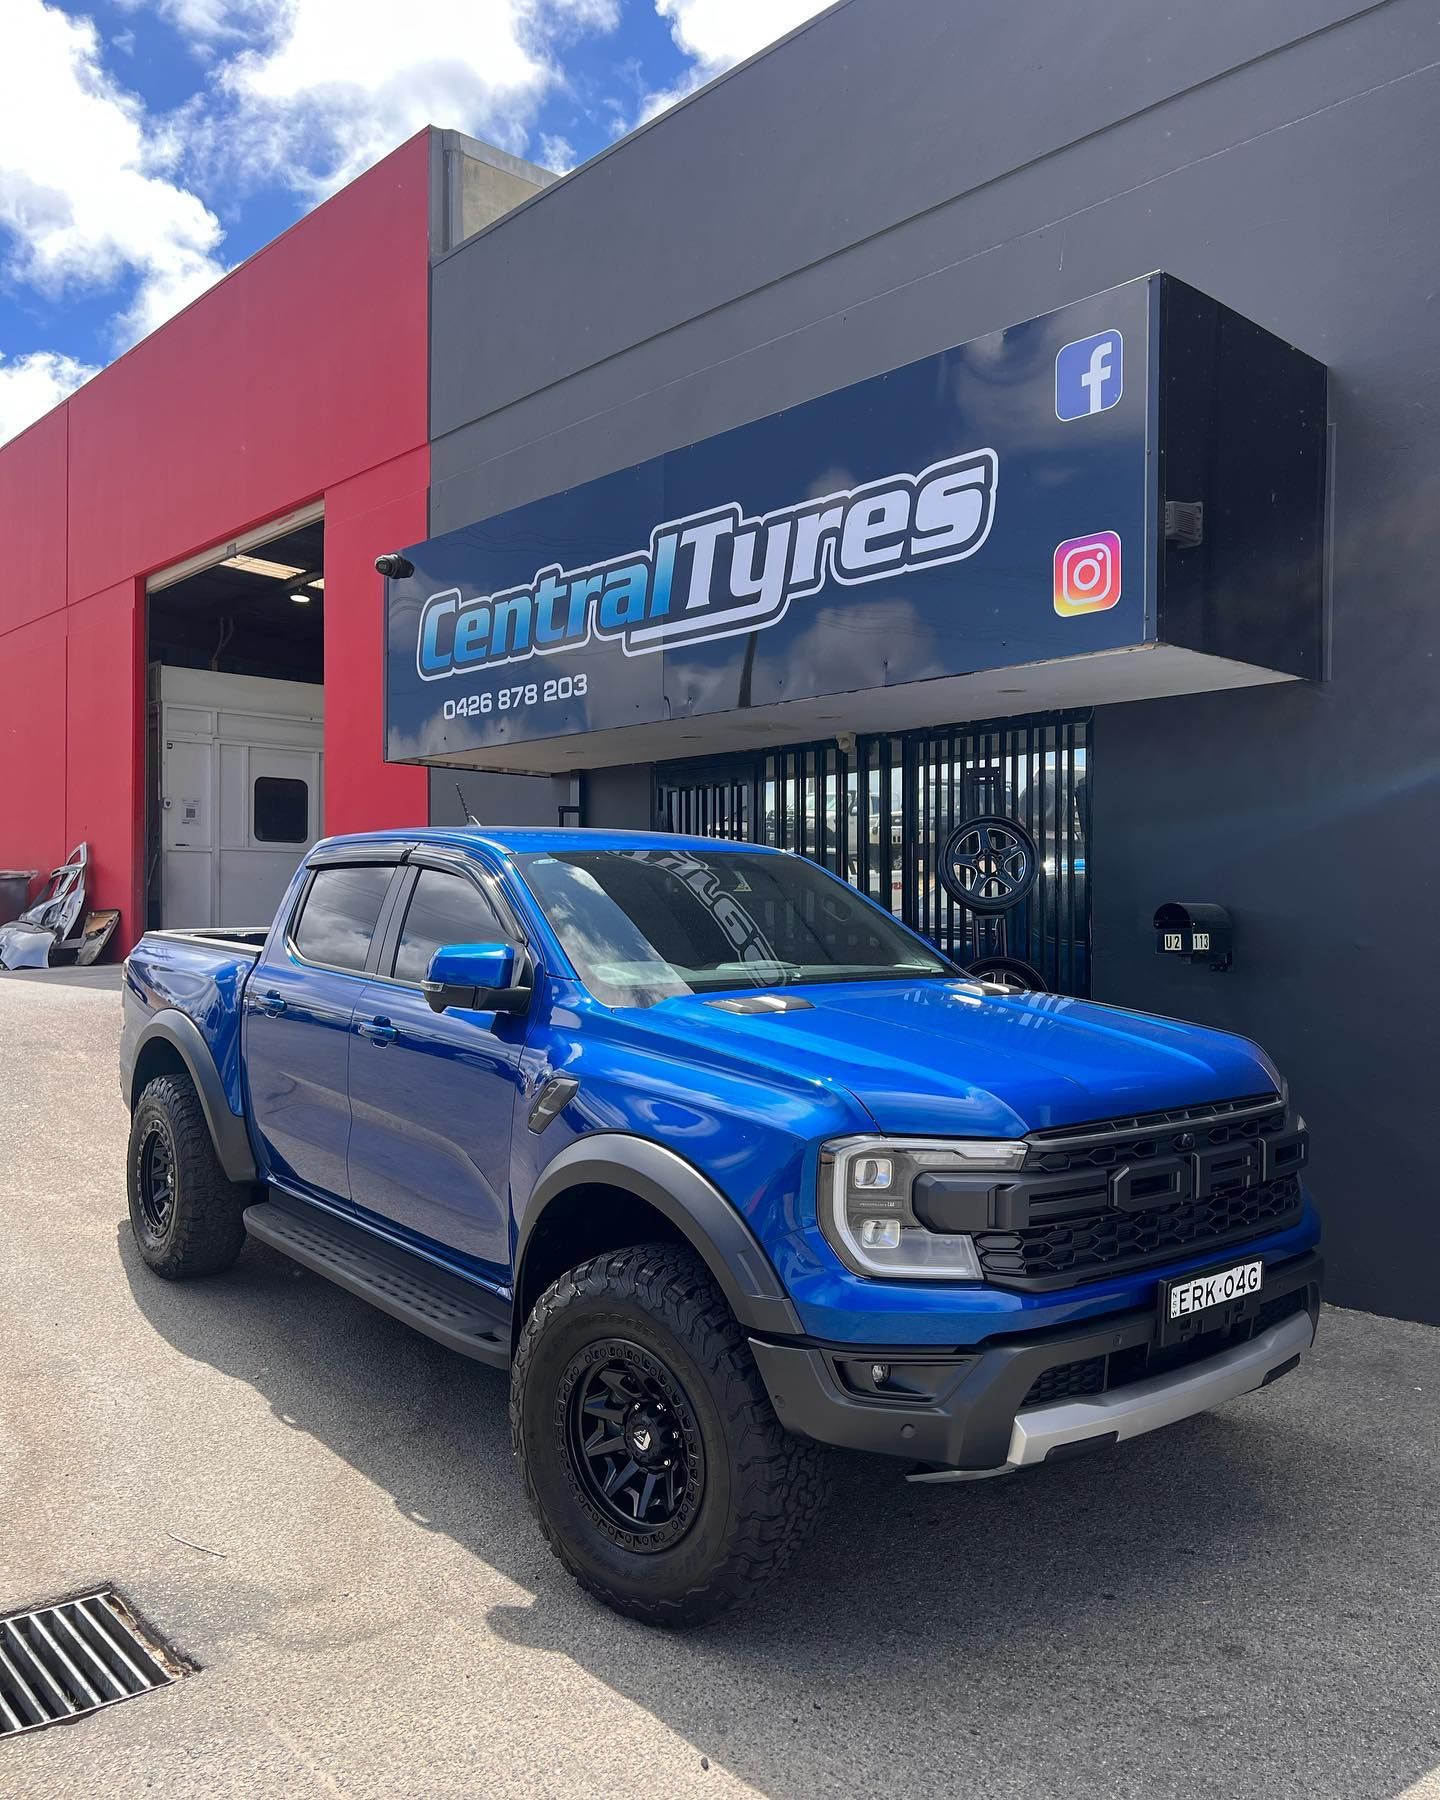 Ford Ranger Raptor Next-Gen with 17×9-inch Fuel Off-Road Covert D694